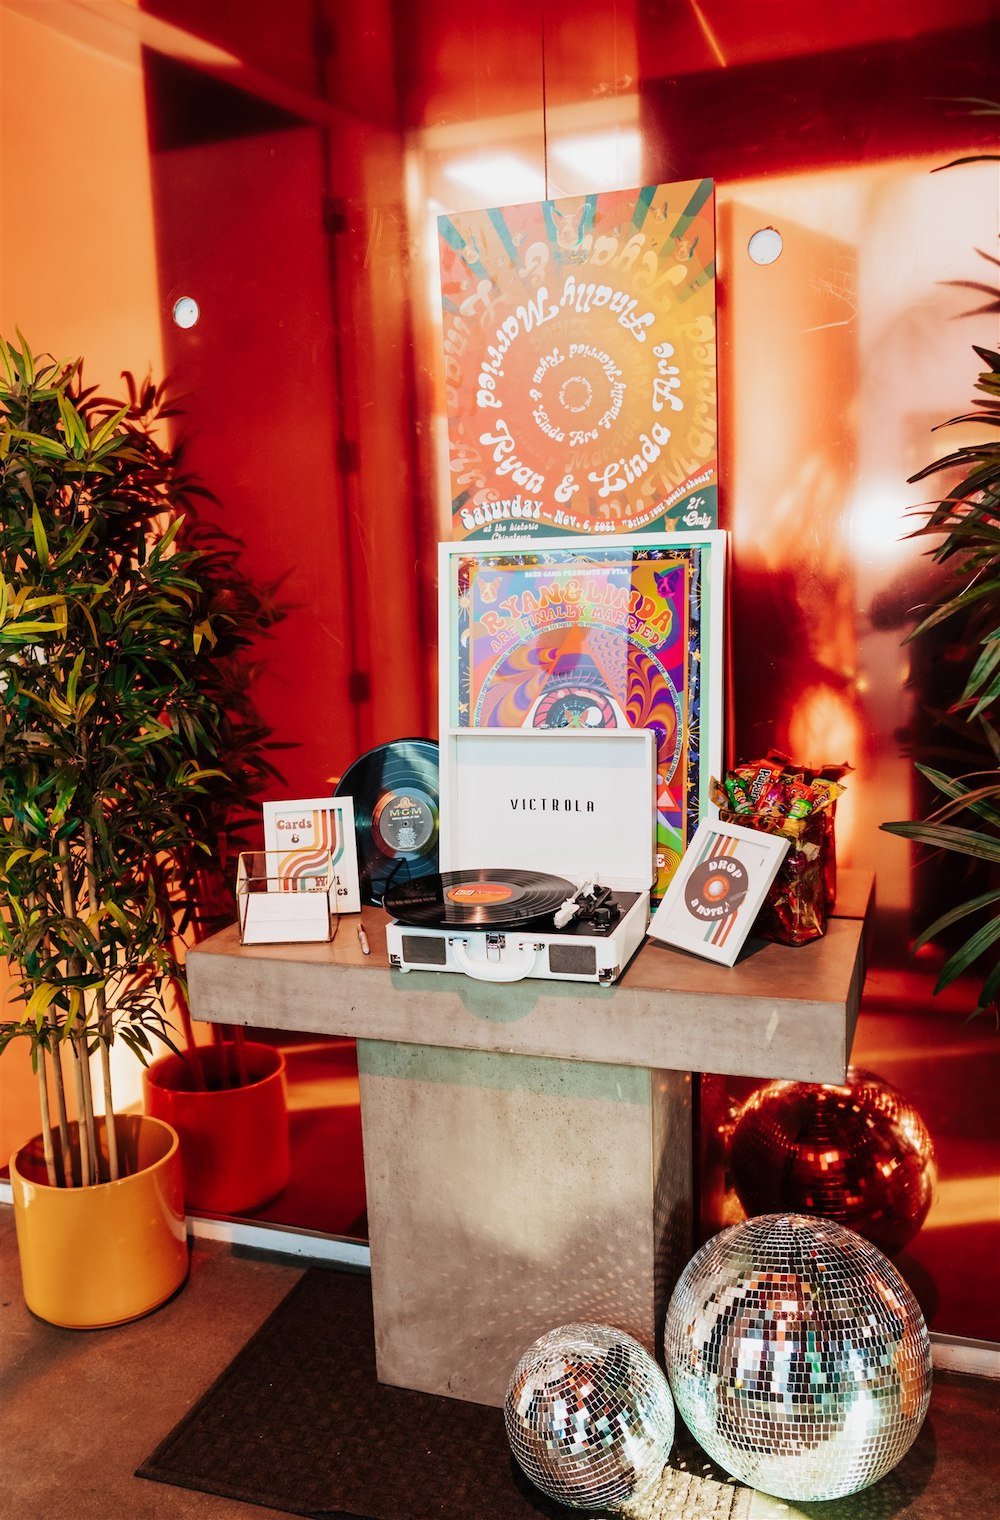 70's theme wedding welcome table at Kim Sing Theatre in Los Angeles.